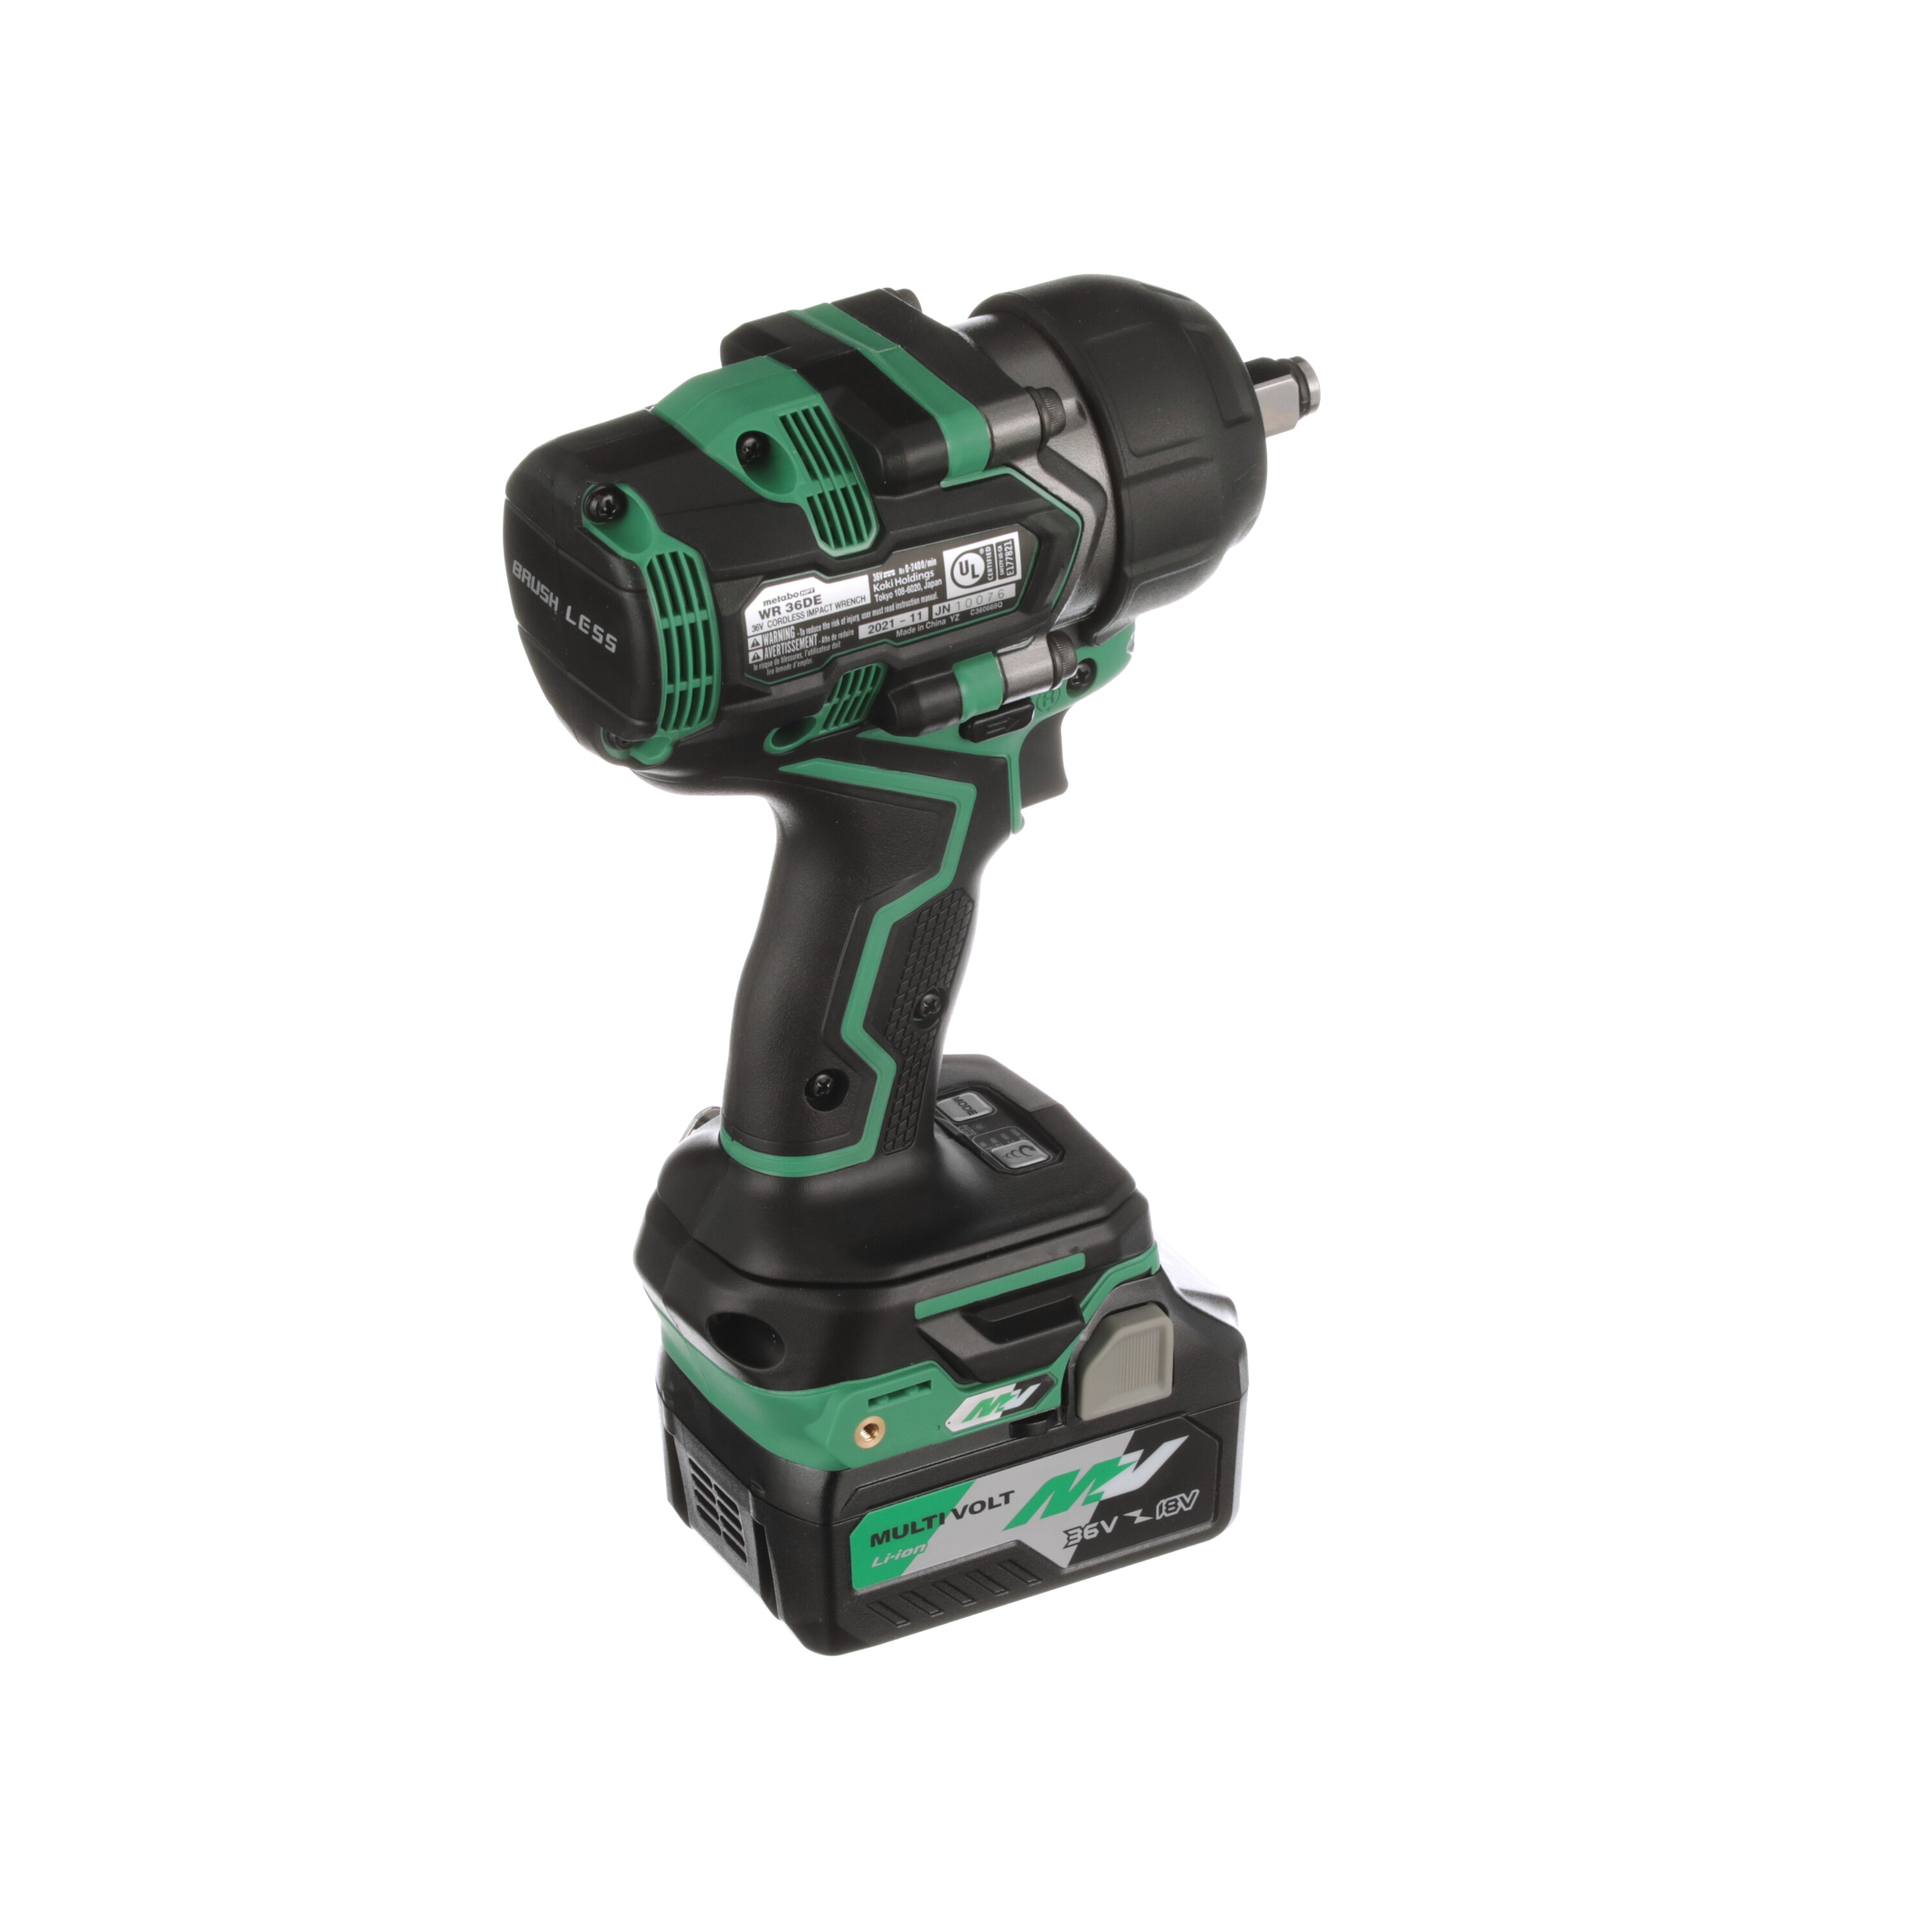 Metabo HPT 36V MultiVolt 1/2 Inch Mid-Torque Impact Wrench in the 